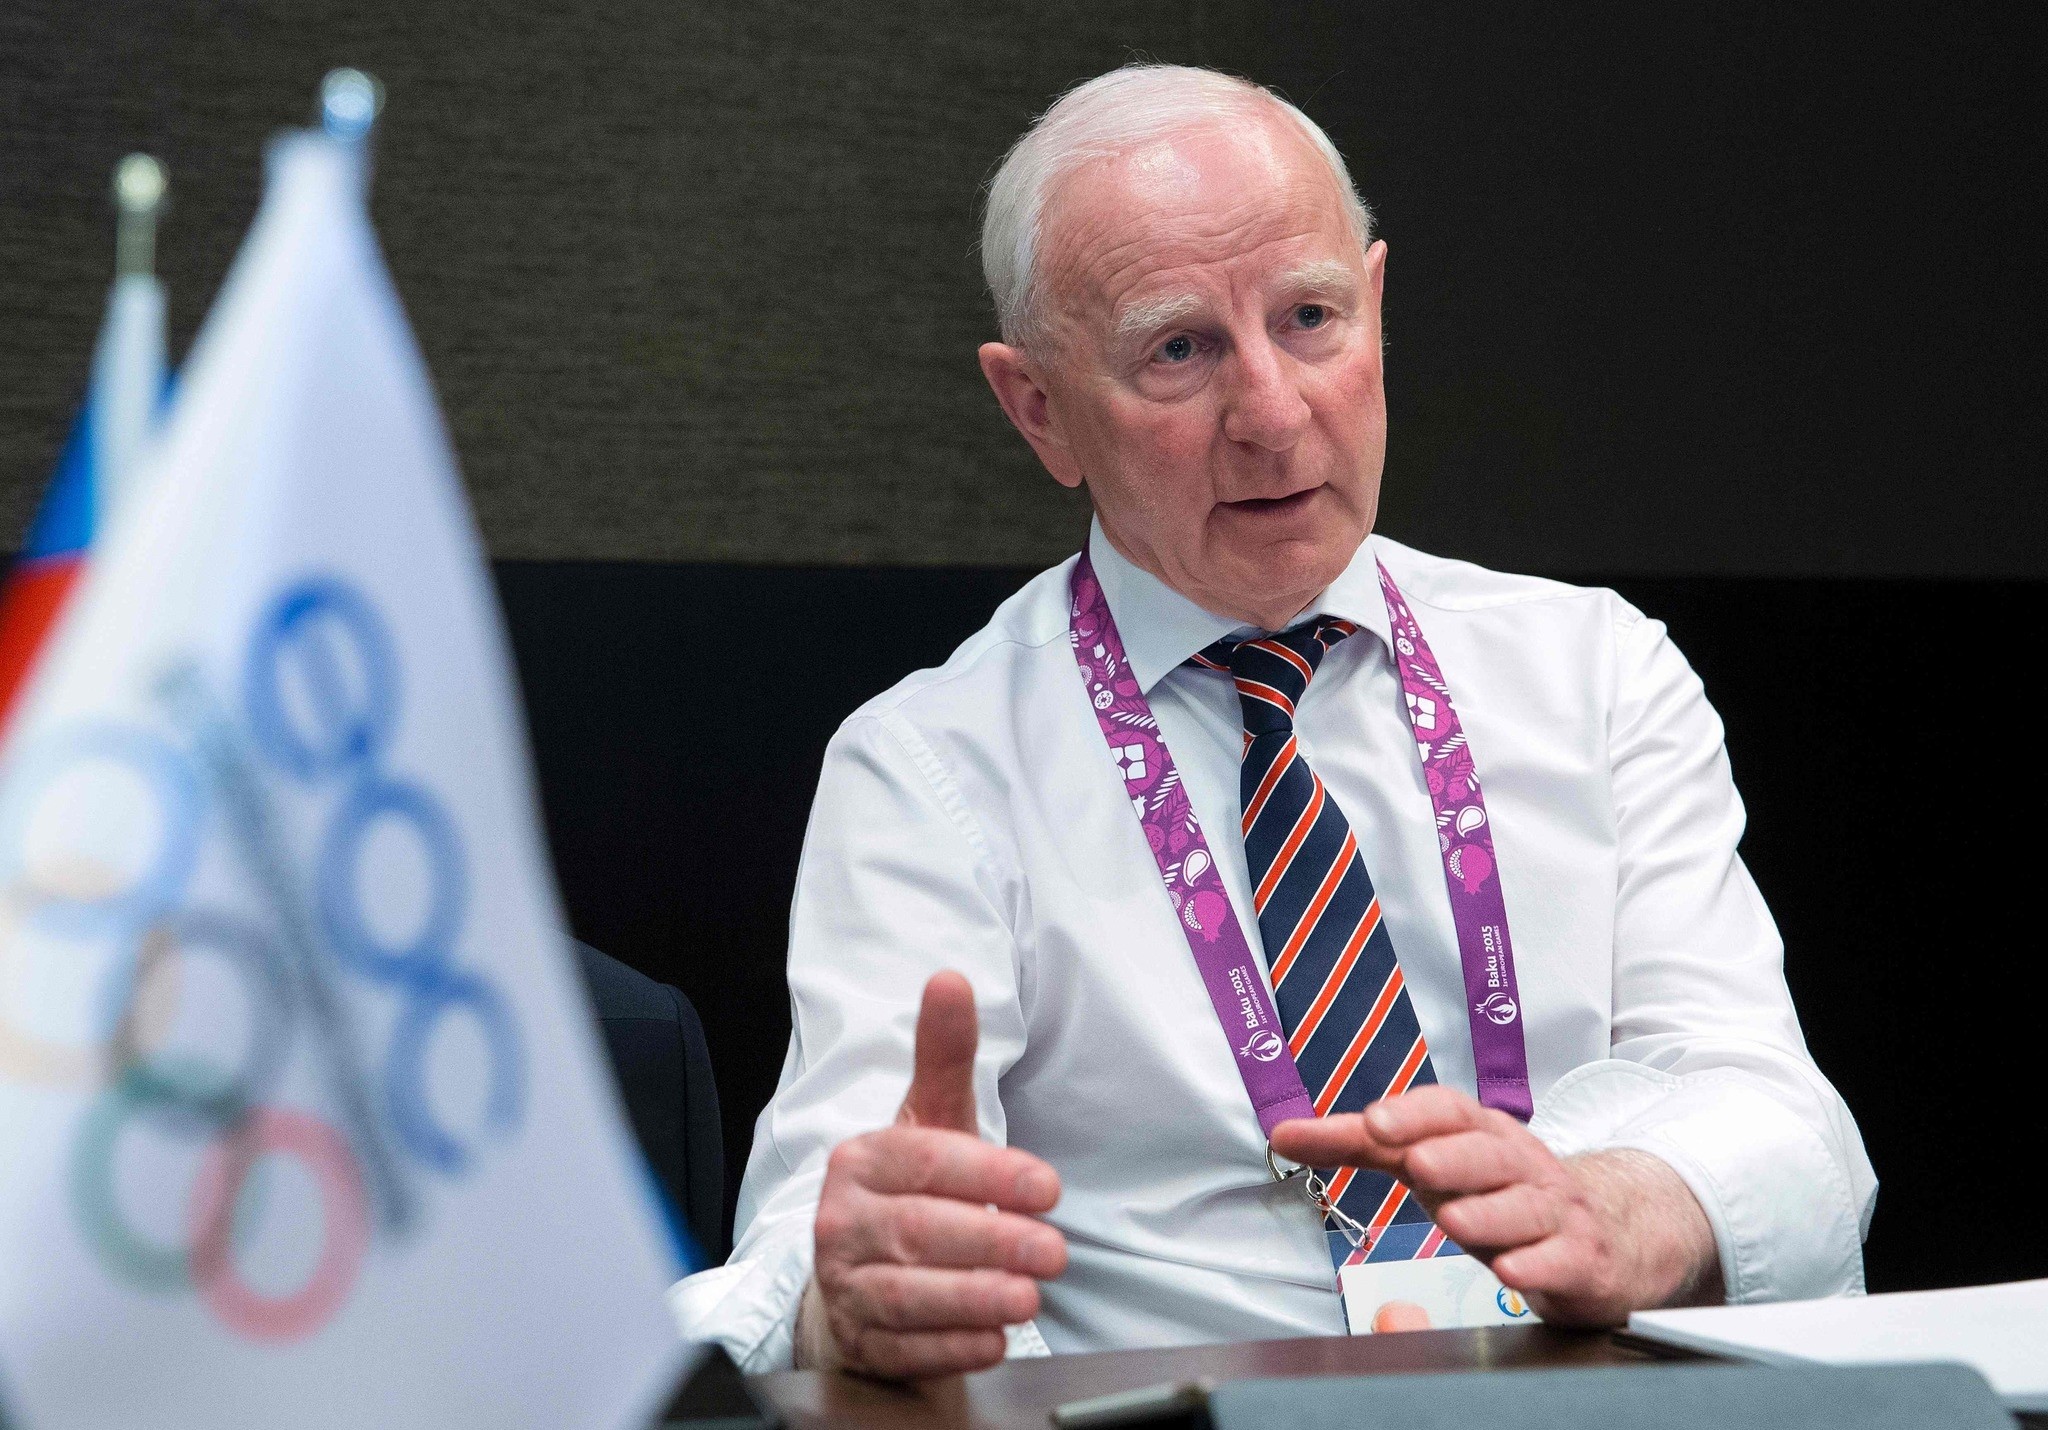 This file photo taken on June 24, 2015 shows President of the European Olympic Committees (EOC) Patrick Hickey of Ireland speaking during an interview at the 2015 European Games in Baku. (AFP Photo)